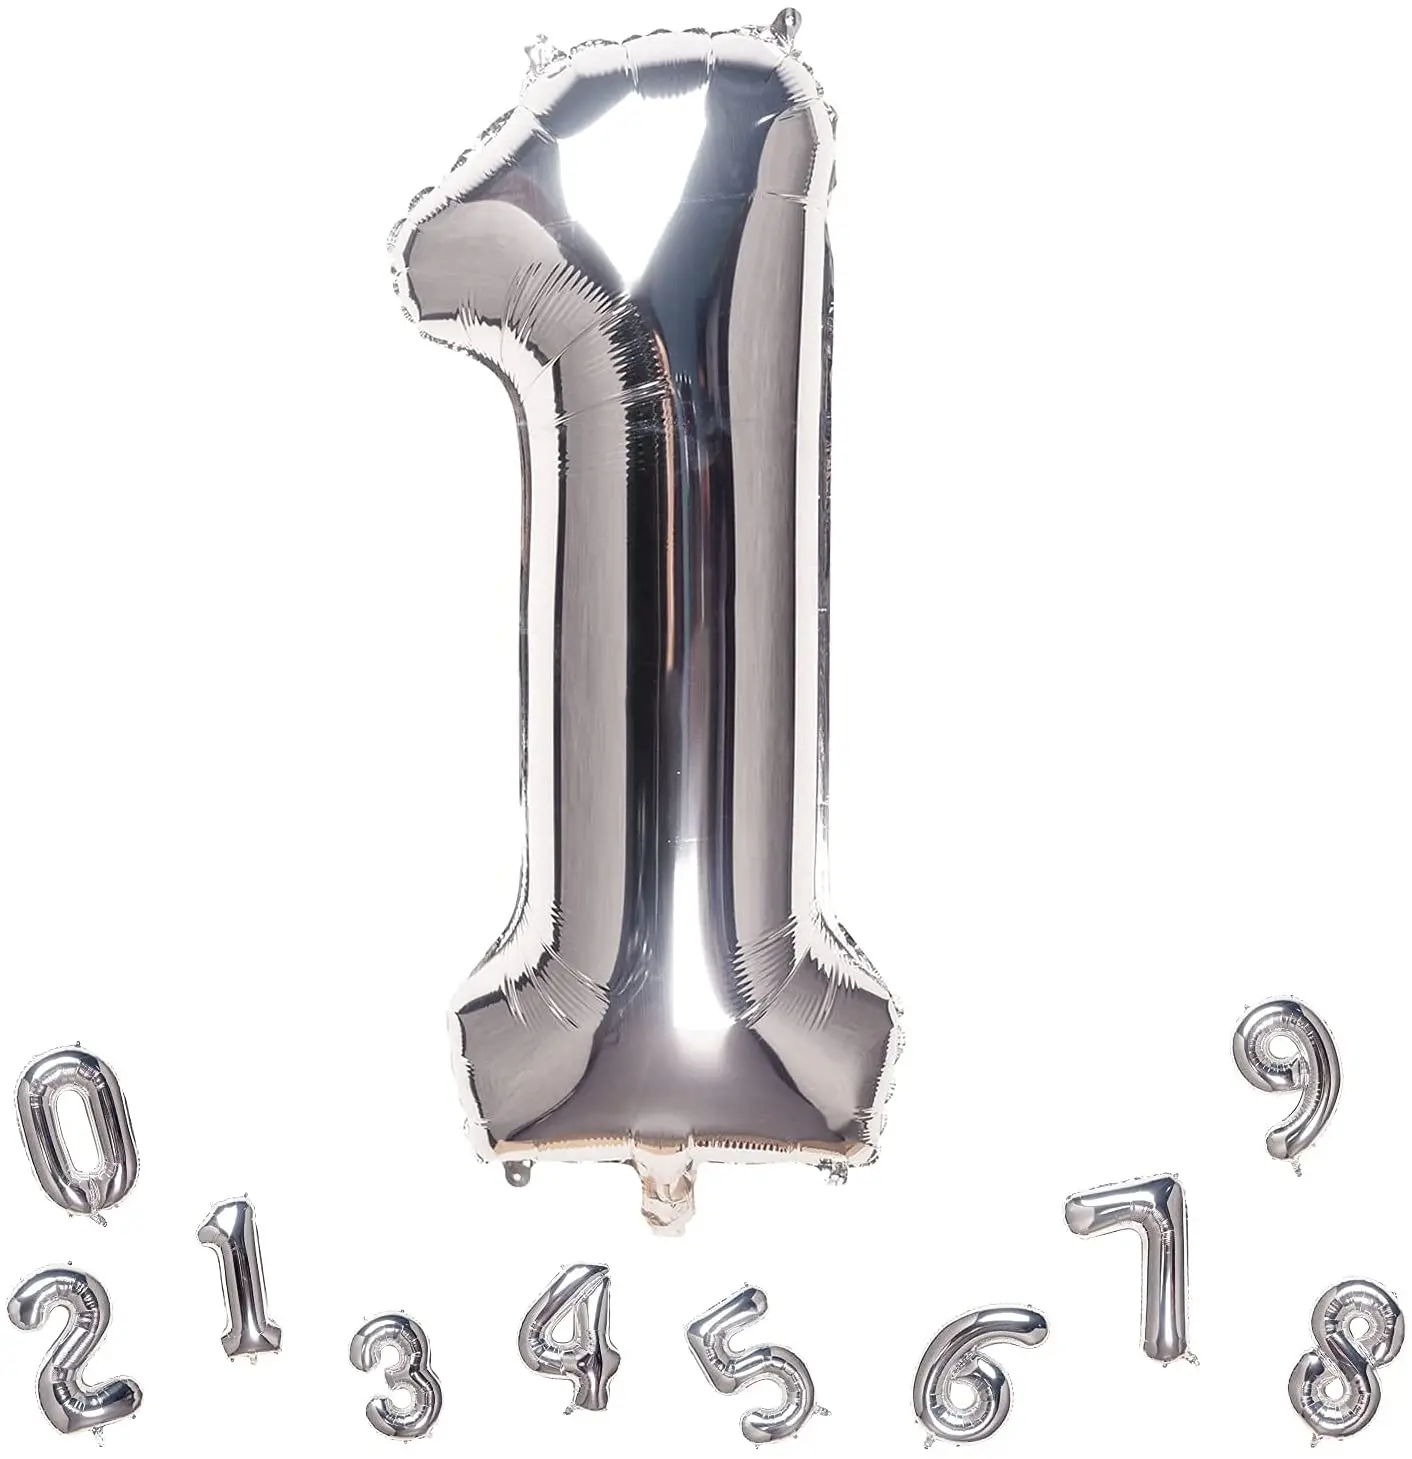 32inch Silver Number Balloon Birthday Wedding Party Supplies Decorations Foil Balloons Kid Boy Toy Baby Shower Foil Balloons